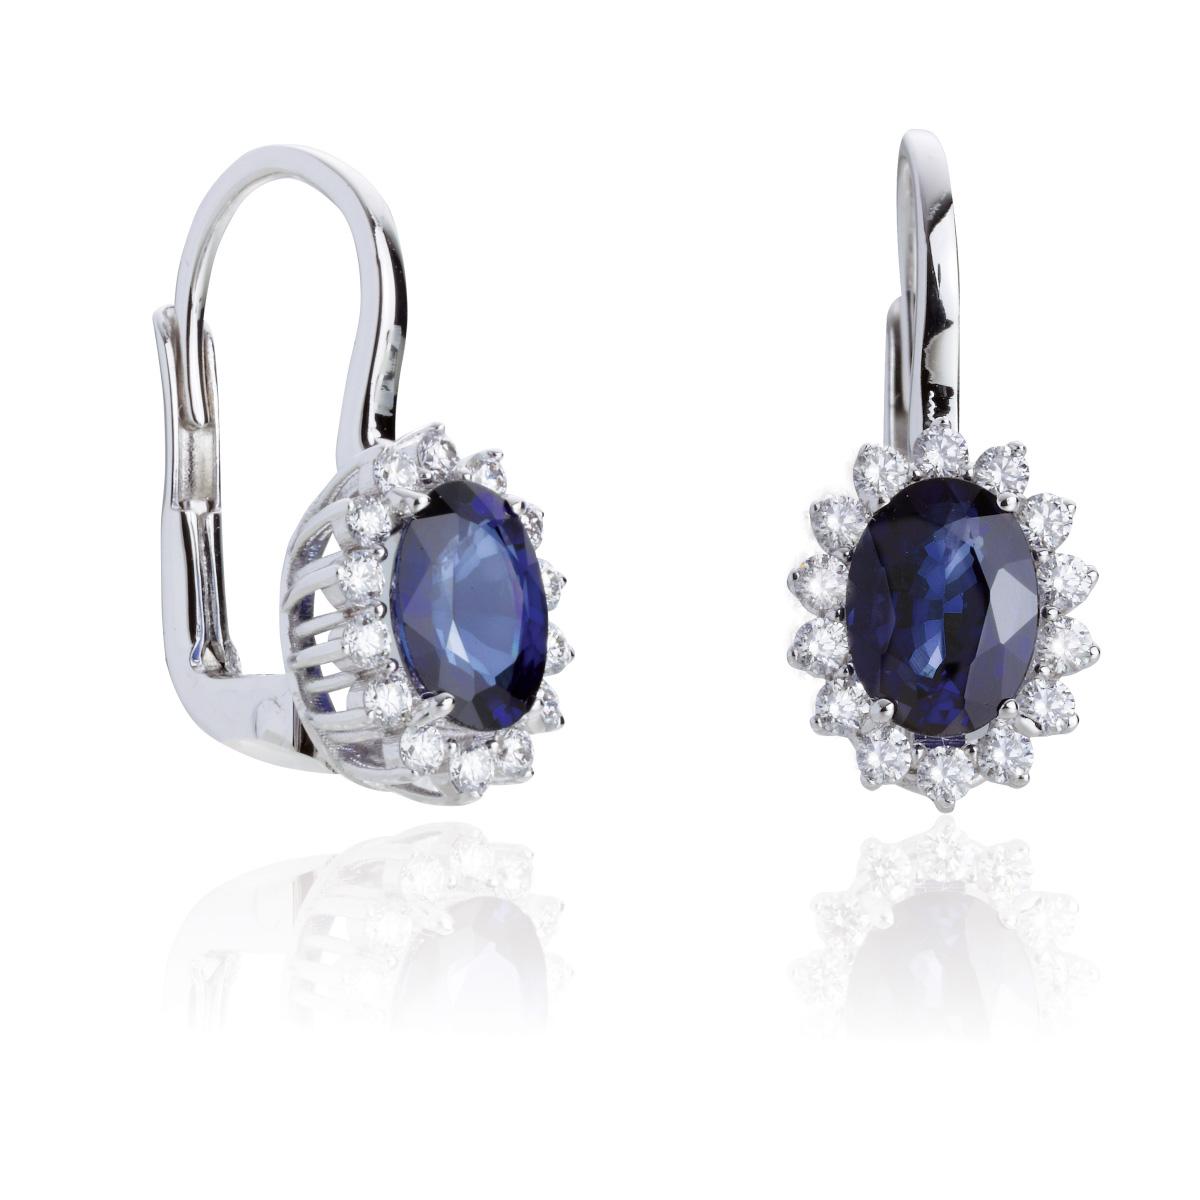 Hook earrings in 18kt white gold with diamonds and precious stones - OD447